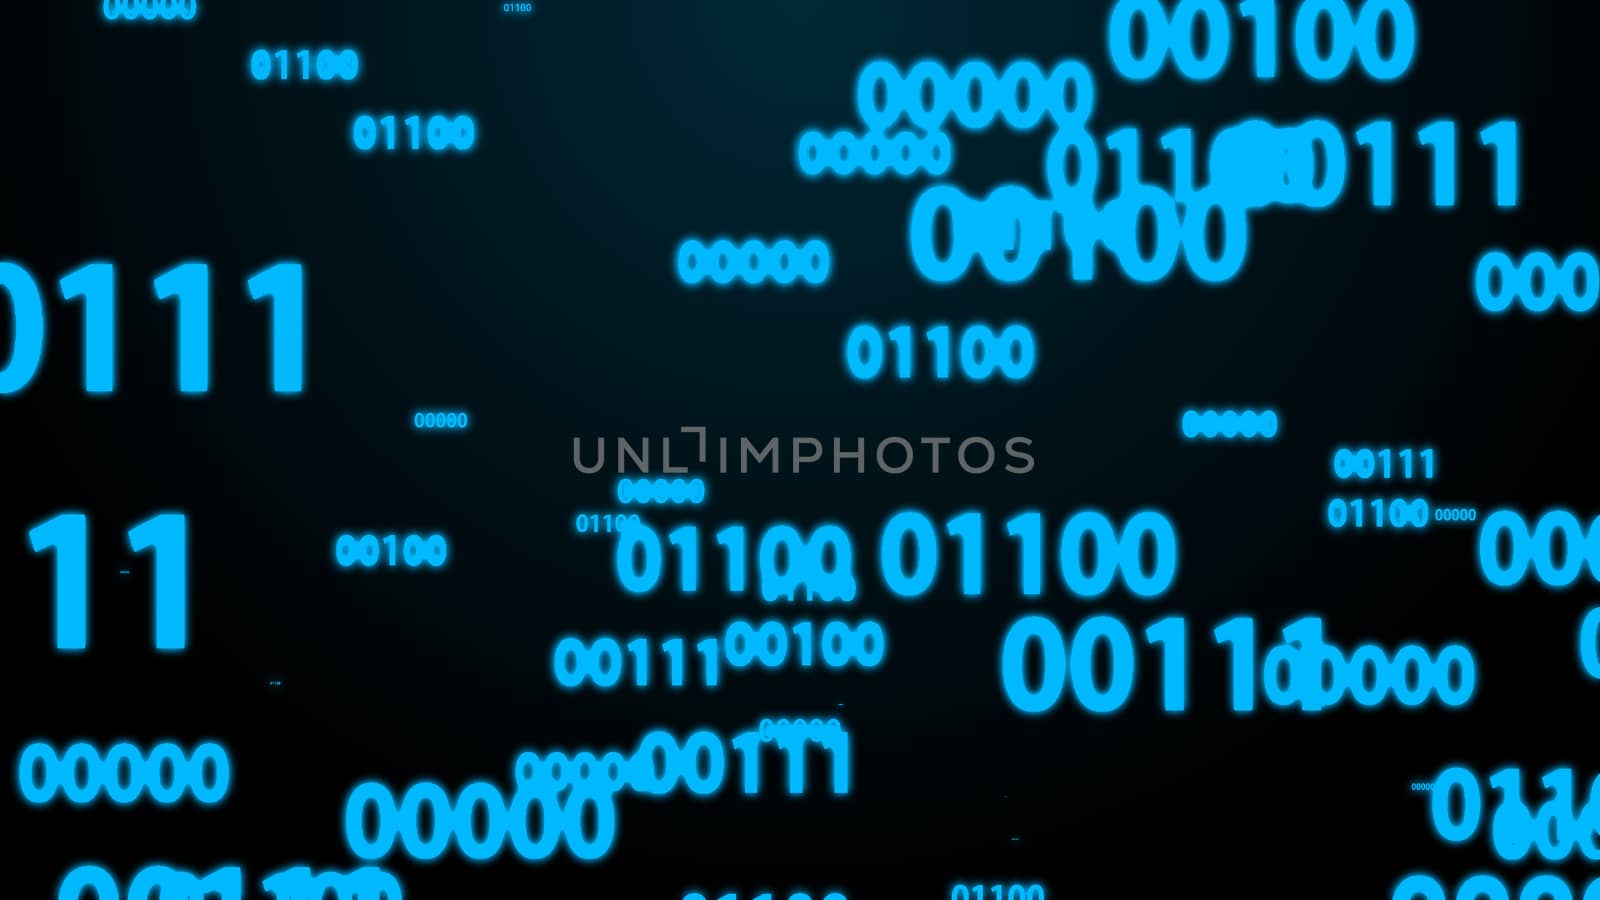 Random 5 Digit Binary Numbers Spreading All Over The Screen in Blue Color Theme Background